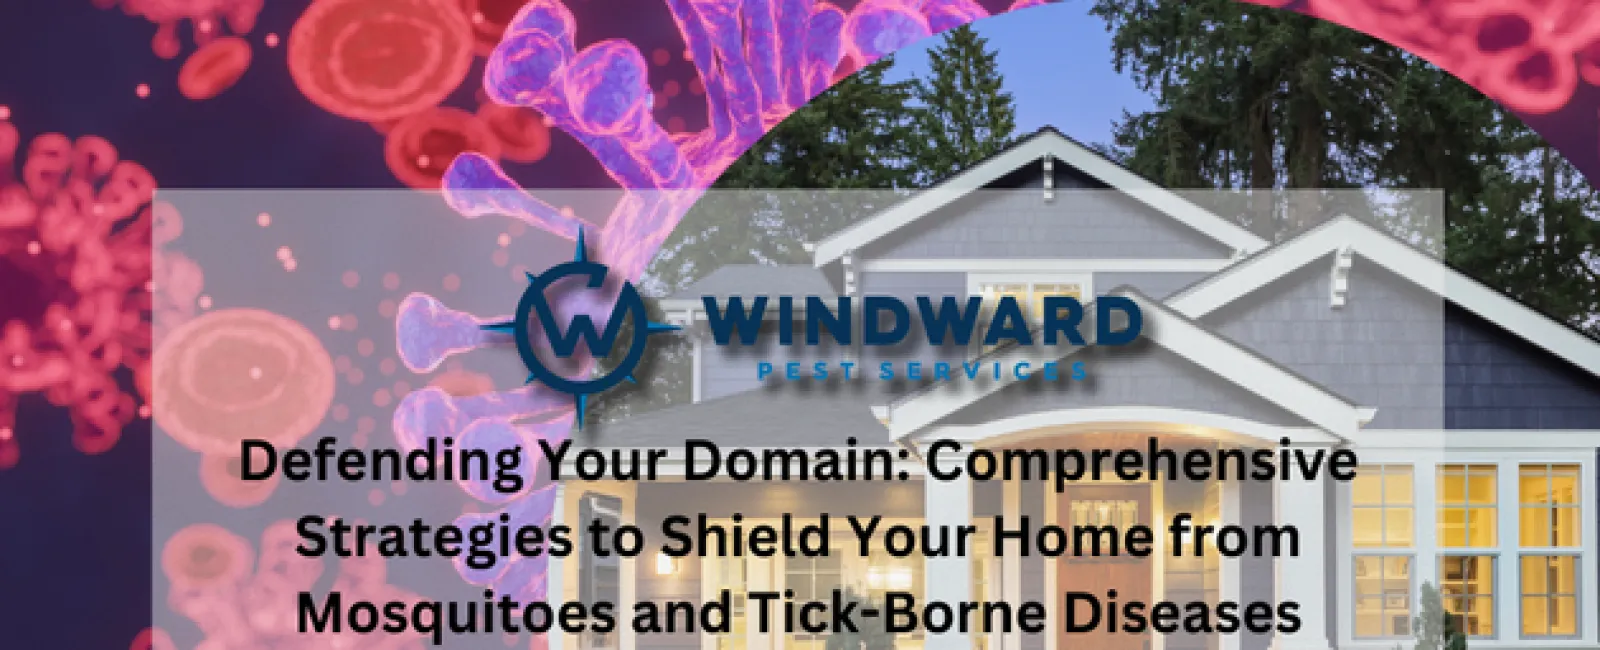 Defending Your Domain: Comprehensive Strategies to Shield Your Home from Mosquitoes and Tick-Borne Diseases